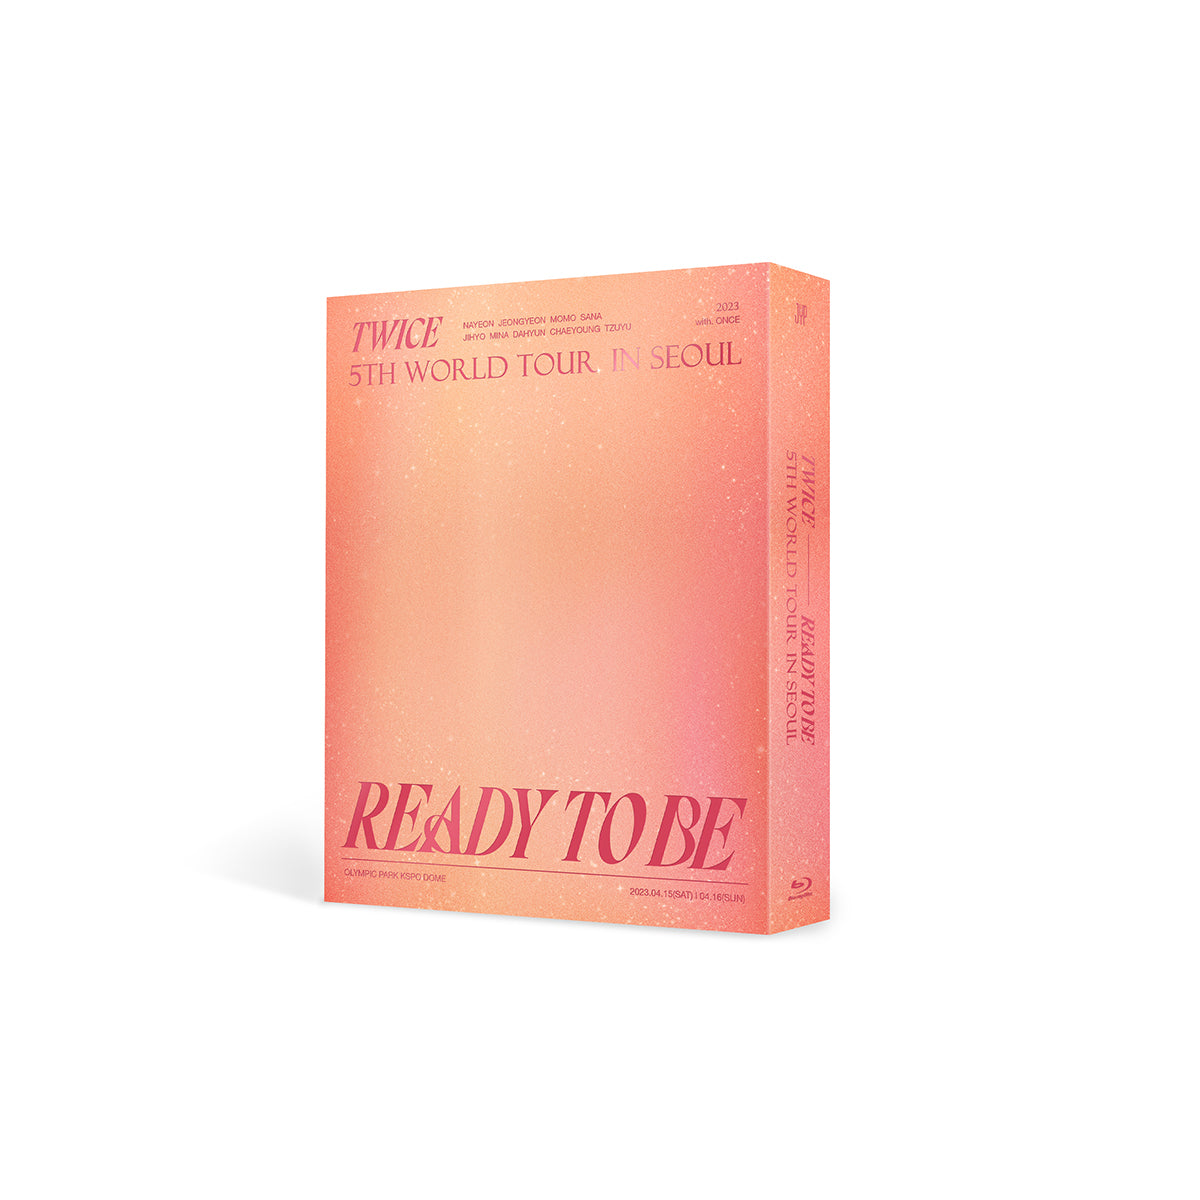 TWICE - TWICE 5TH WORLD TOUR [READY TO BE] IN SEOUL Blu-ray [PRE-ORDER]